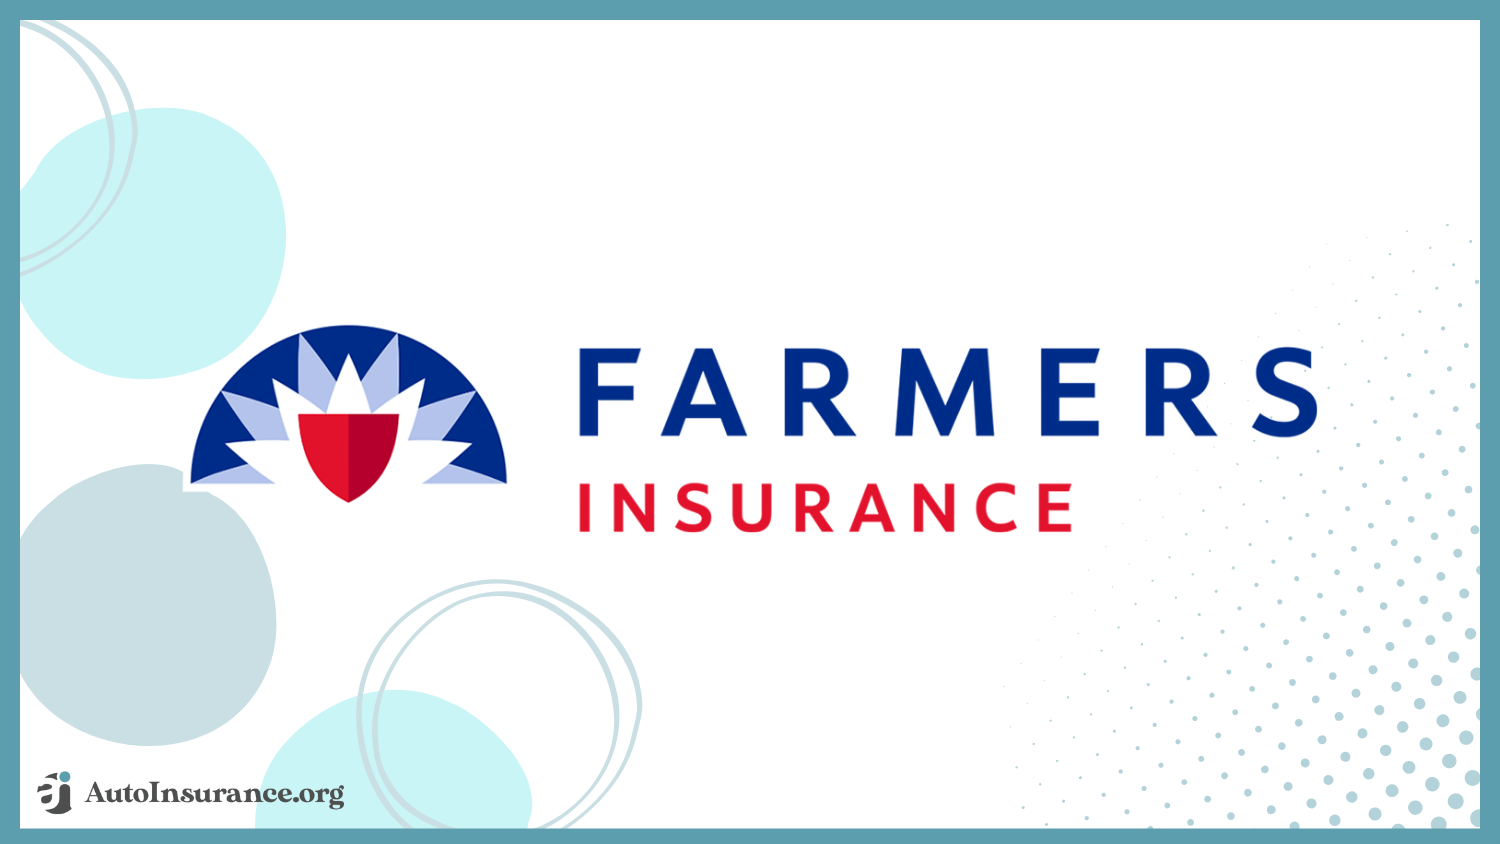 farmers largest auto insurance companies in the U.S.